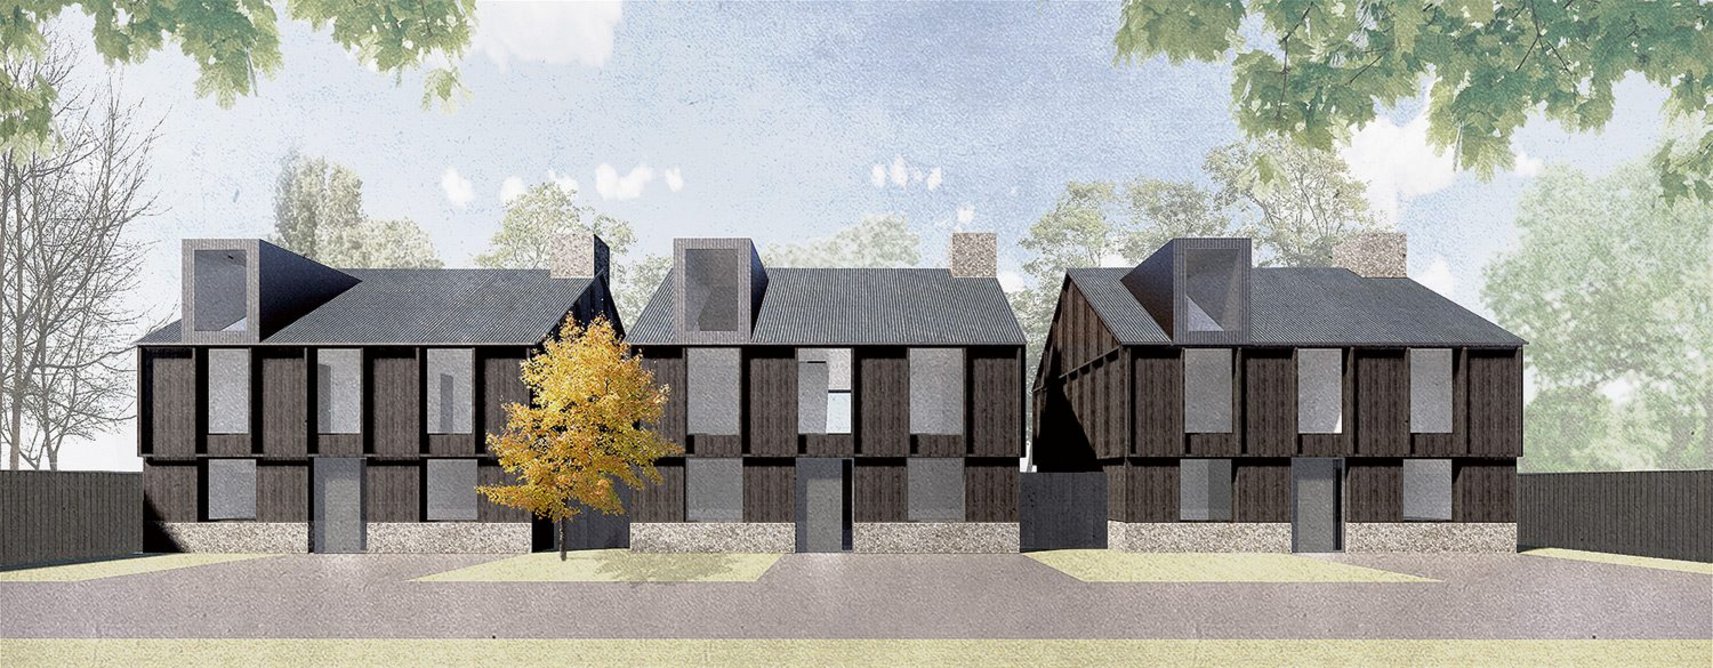 A small developer housing feasibility study in St Albans, located on the edge of greenbelt.